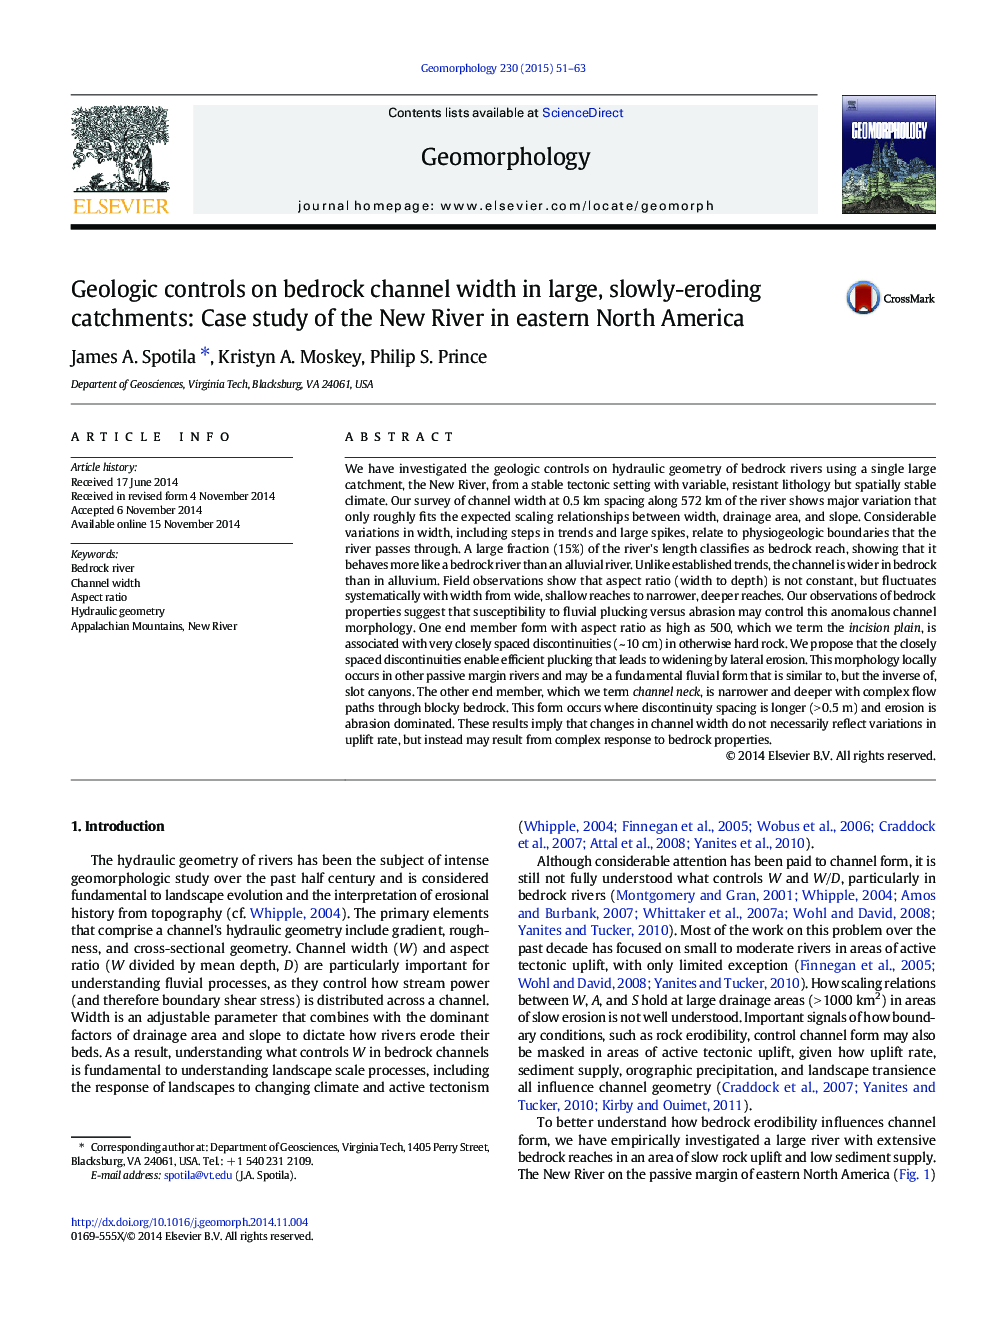 Geologic controls on bedrock channel width in large, slowly-eroding catchments: Case study of the New River in eastern North America